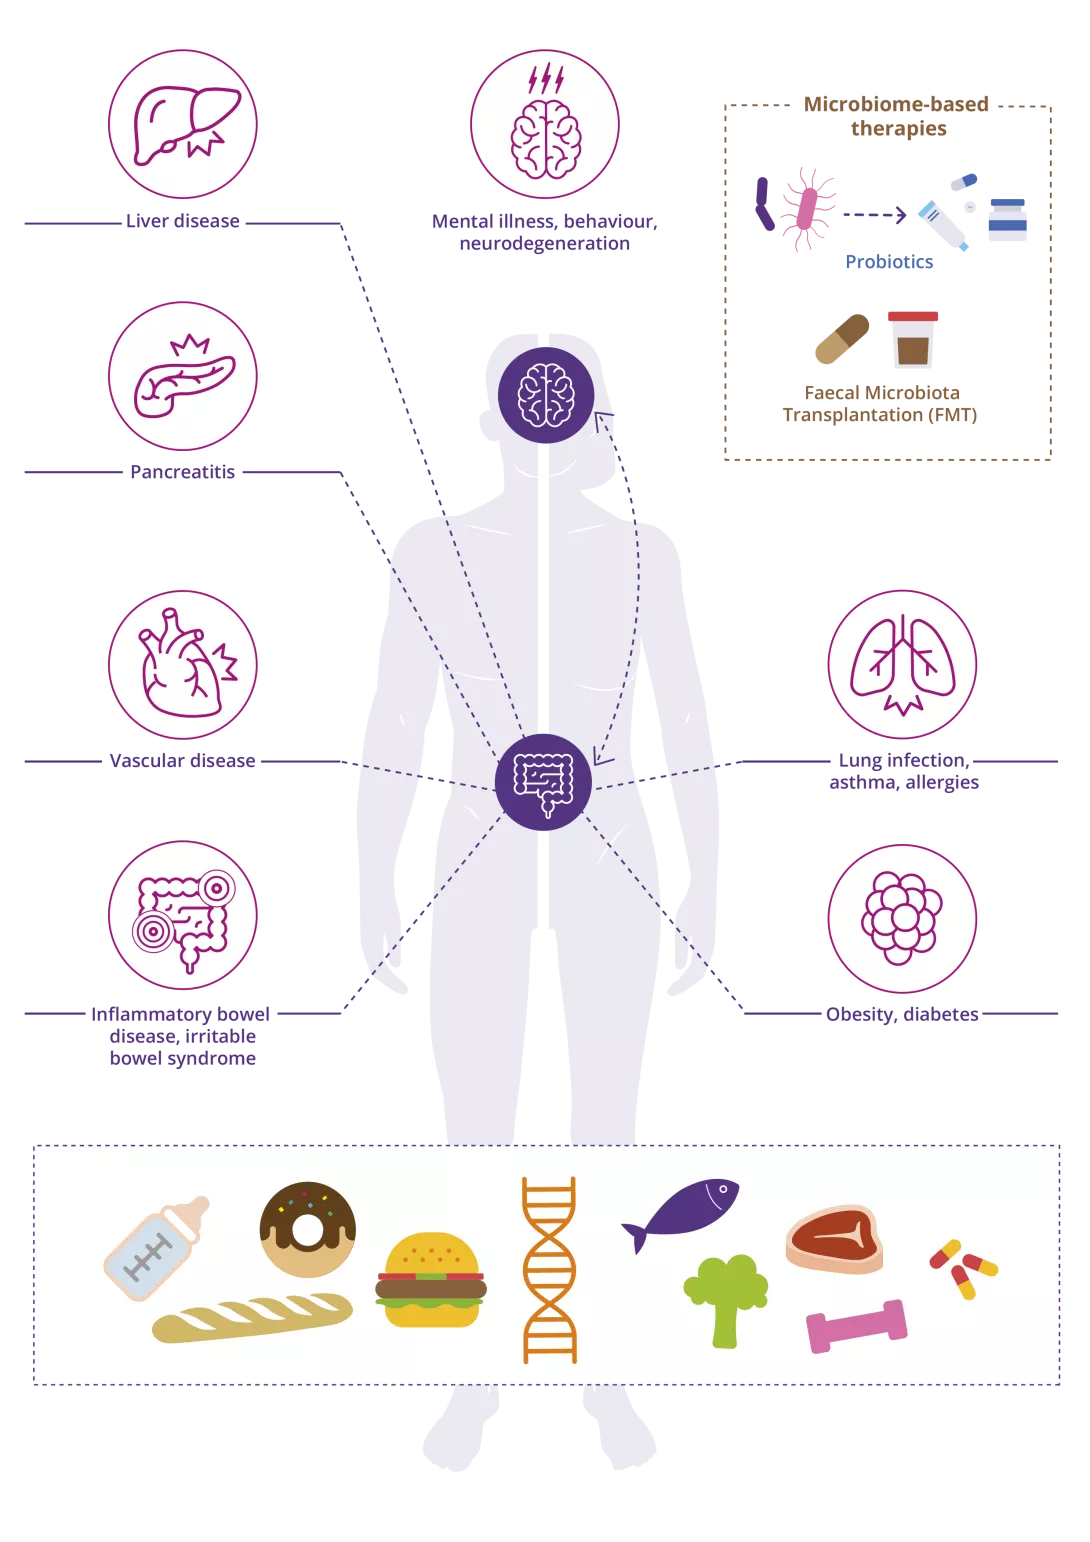 The role of the gut microbiota in human health